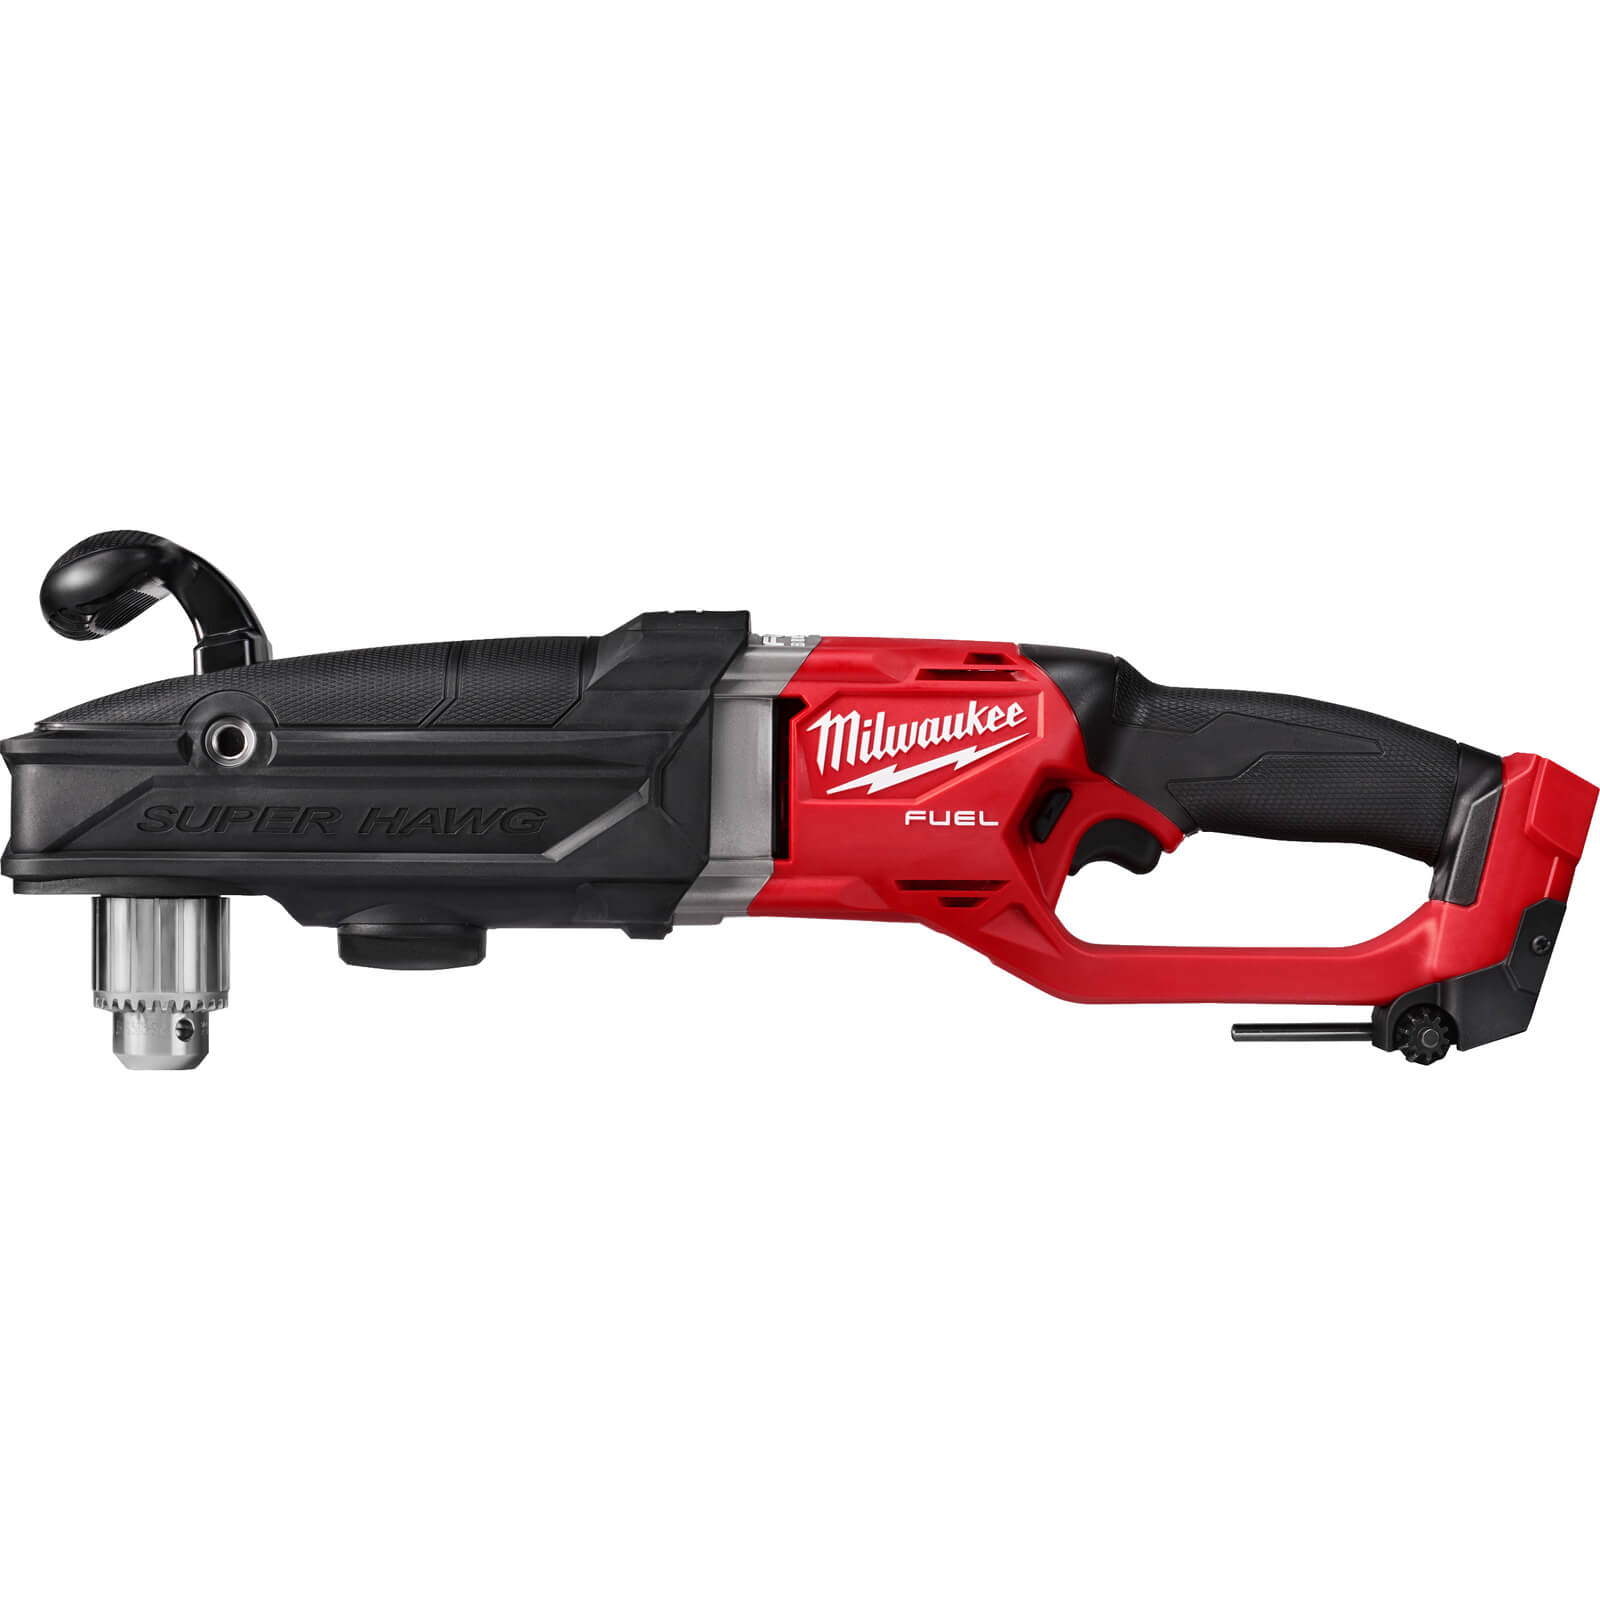 Milwaukee M18 FRAD2 Fuel 18v Cordless Brushless Super Hawg Angle Drill No Batteries No Charger No Case